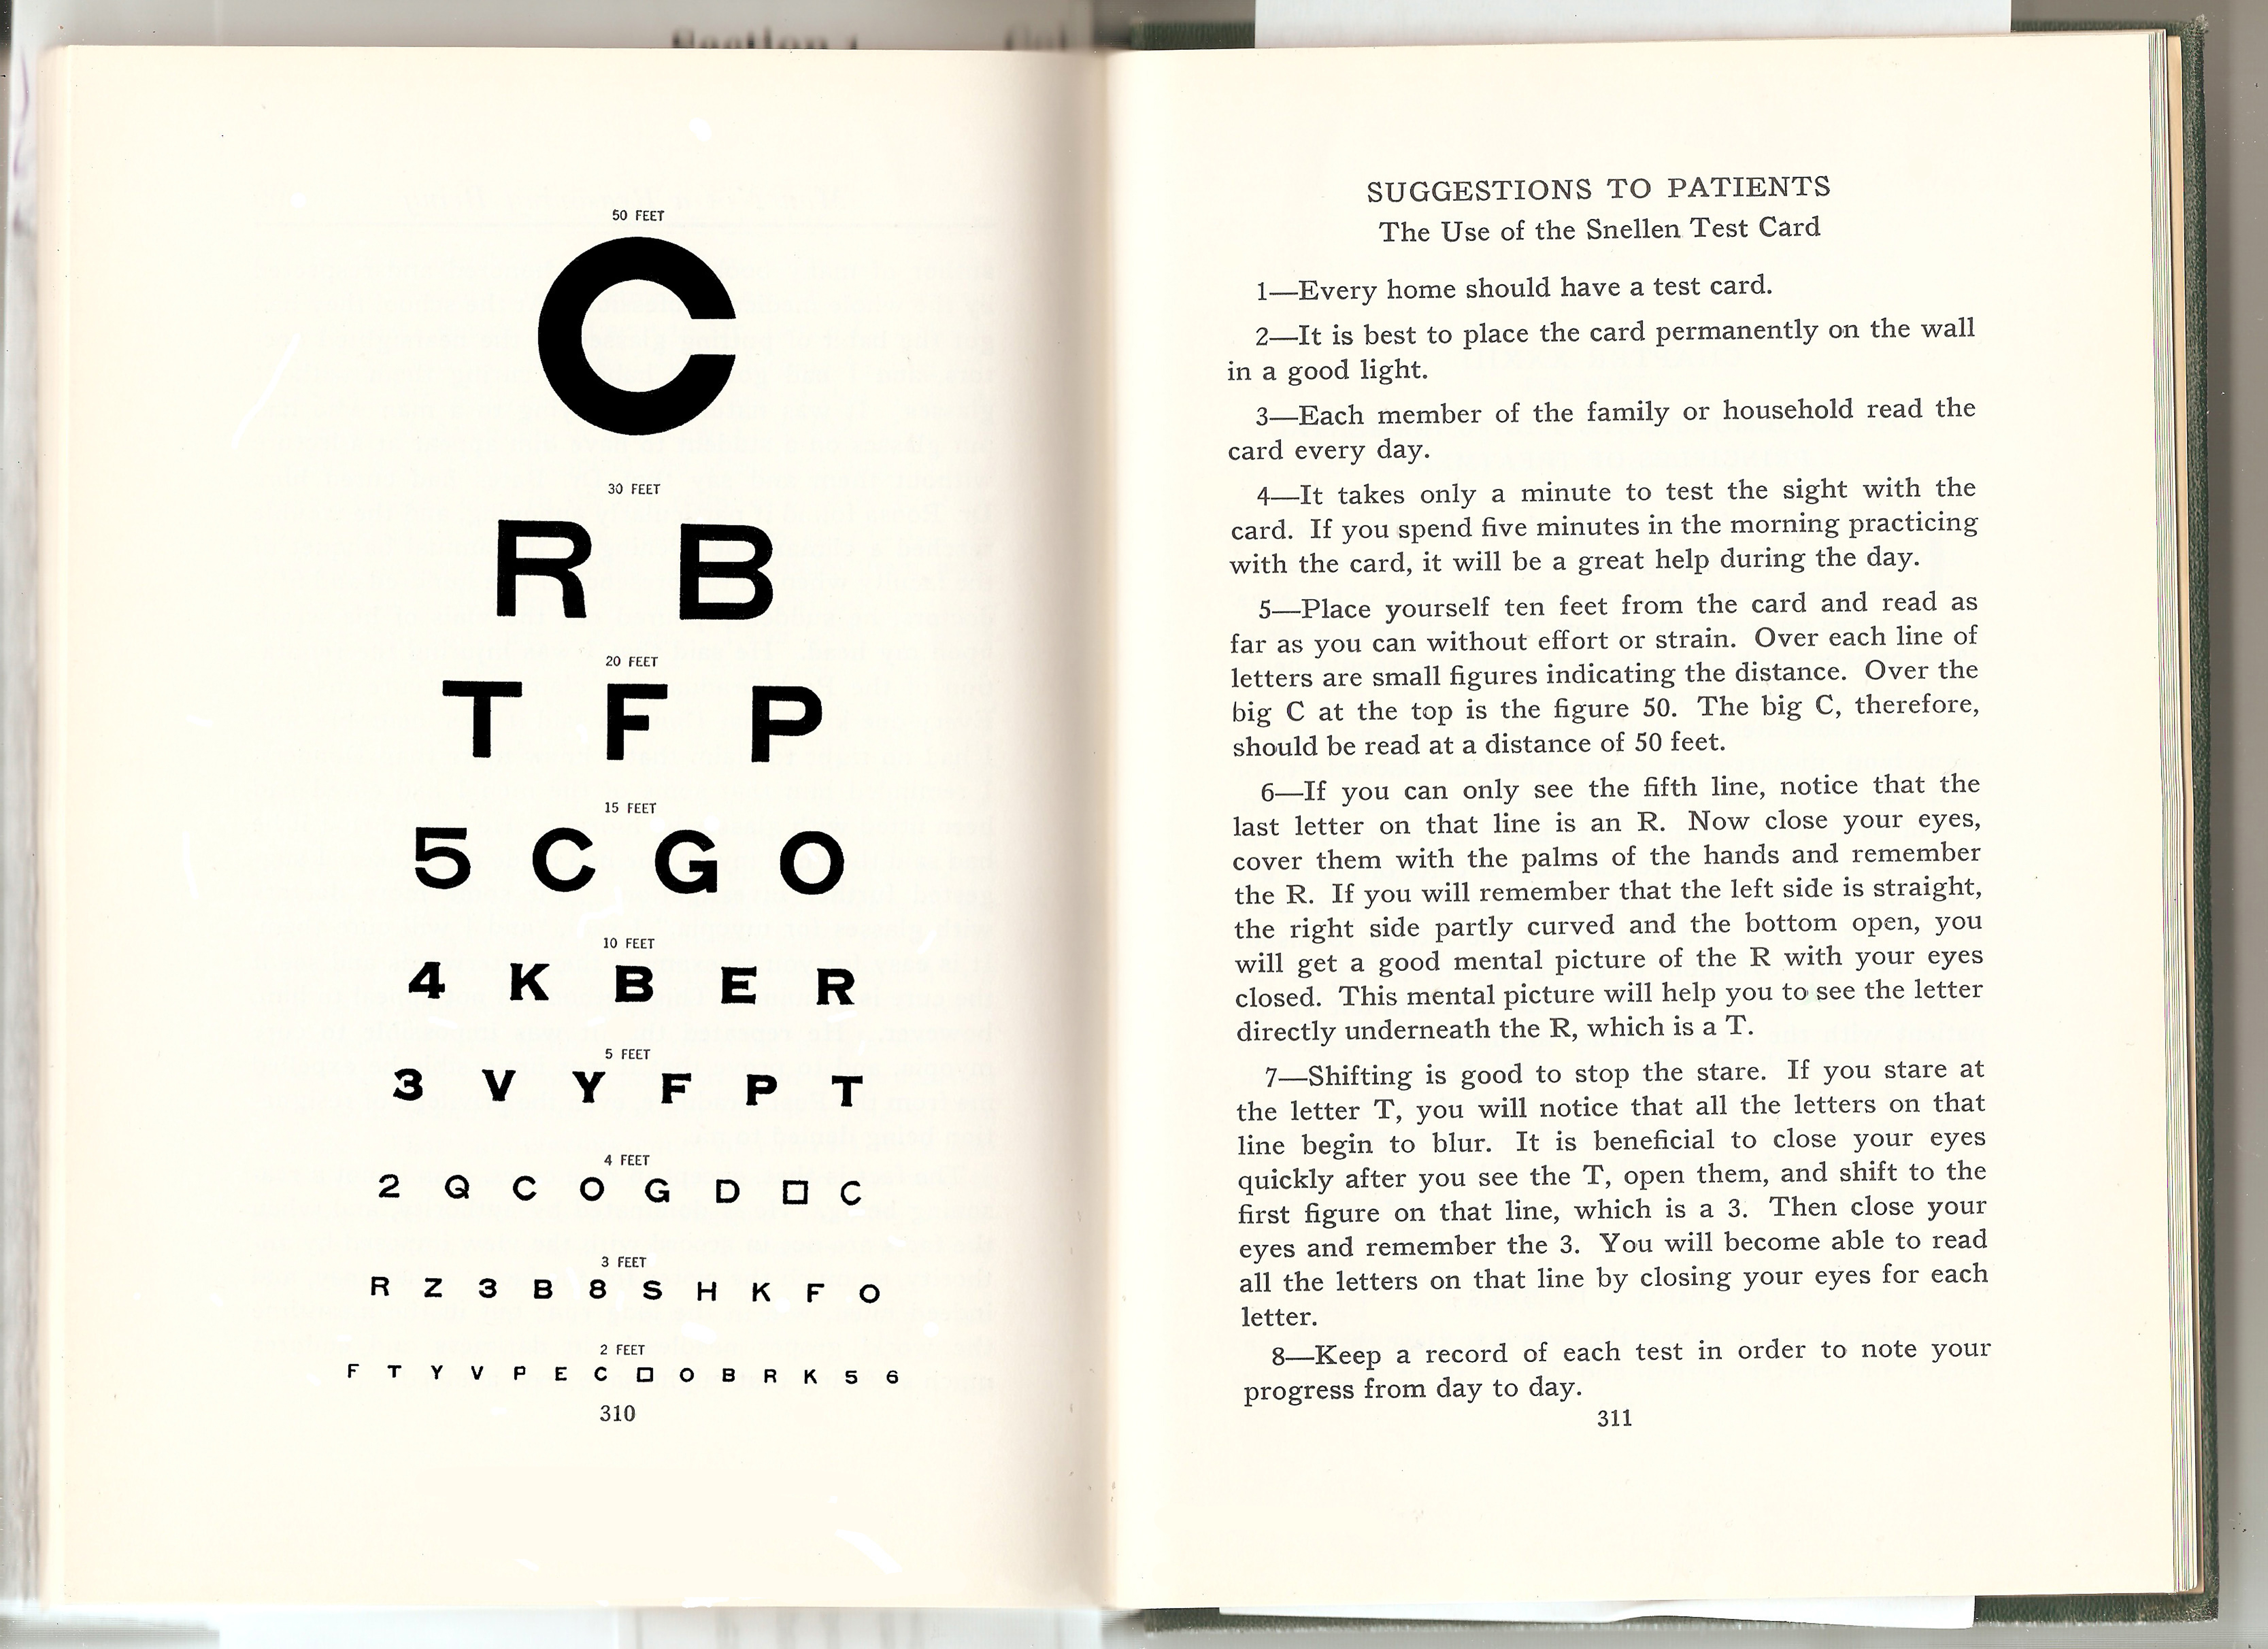 Dr. Bates, Emily's C Eyechart with Suggestions to Patients - 1940 PSWG Edition